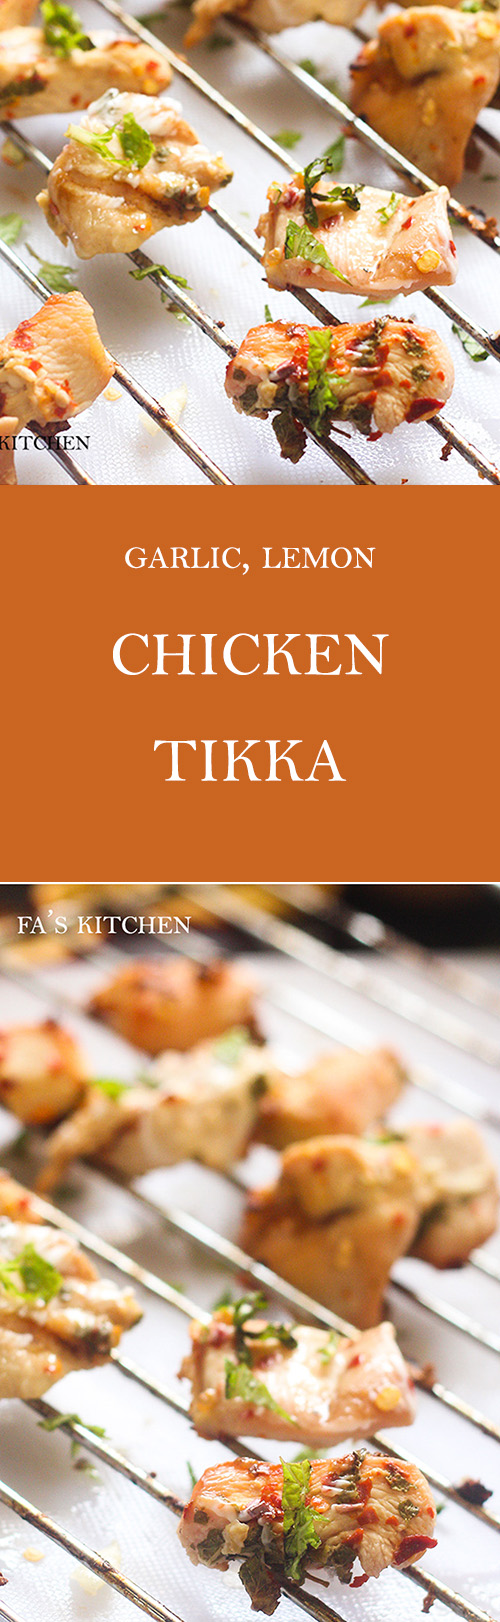 Garlic Lemon Chicken Tikka recipe, a great starter that is simply mouth watering. It is so delicious and drooling that you will never have enough of it.